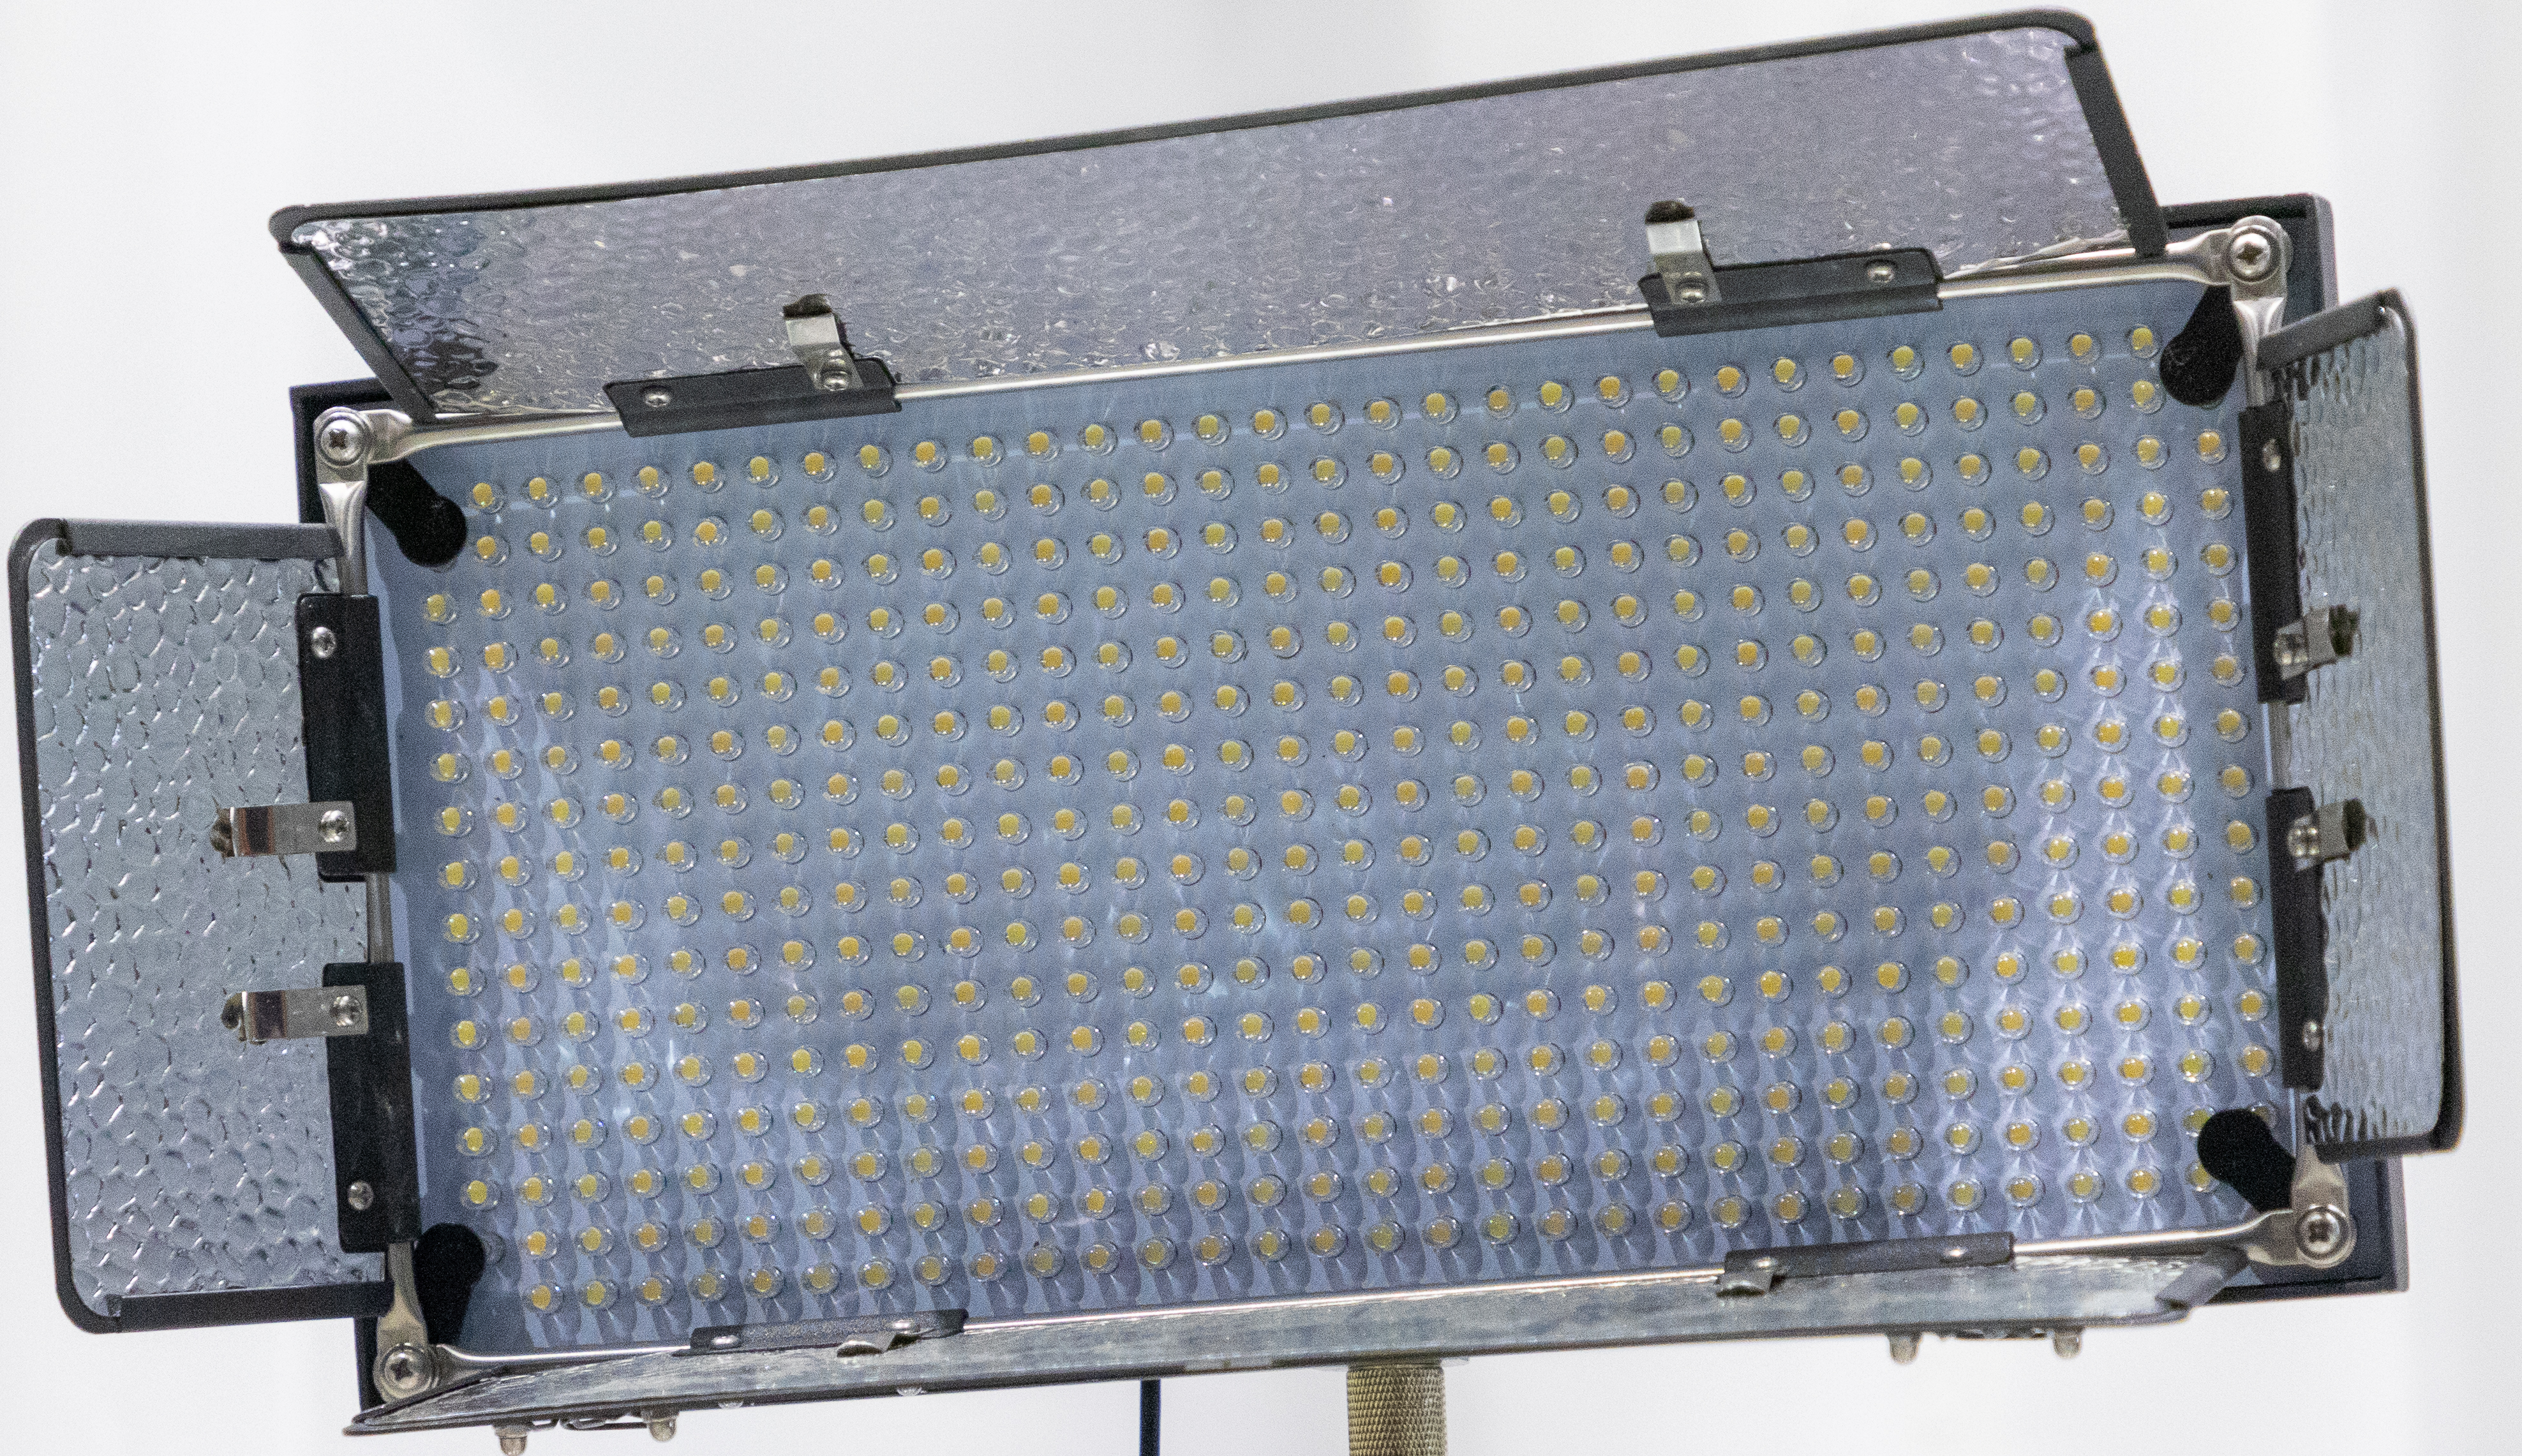 A rectangular panel light with many tiny light bulbs that are LEDS. 